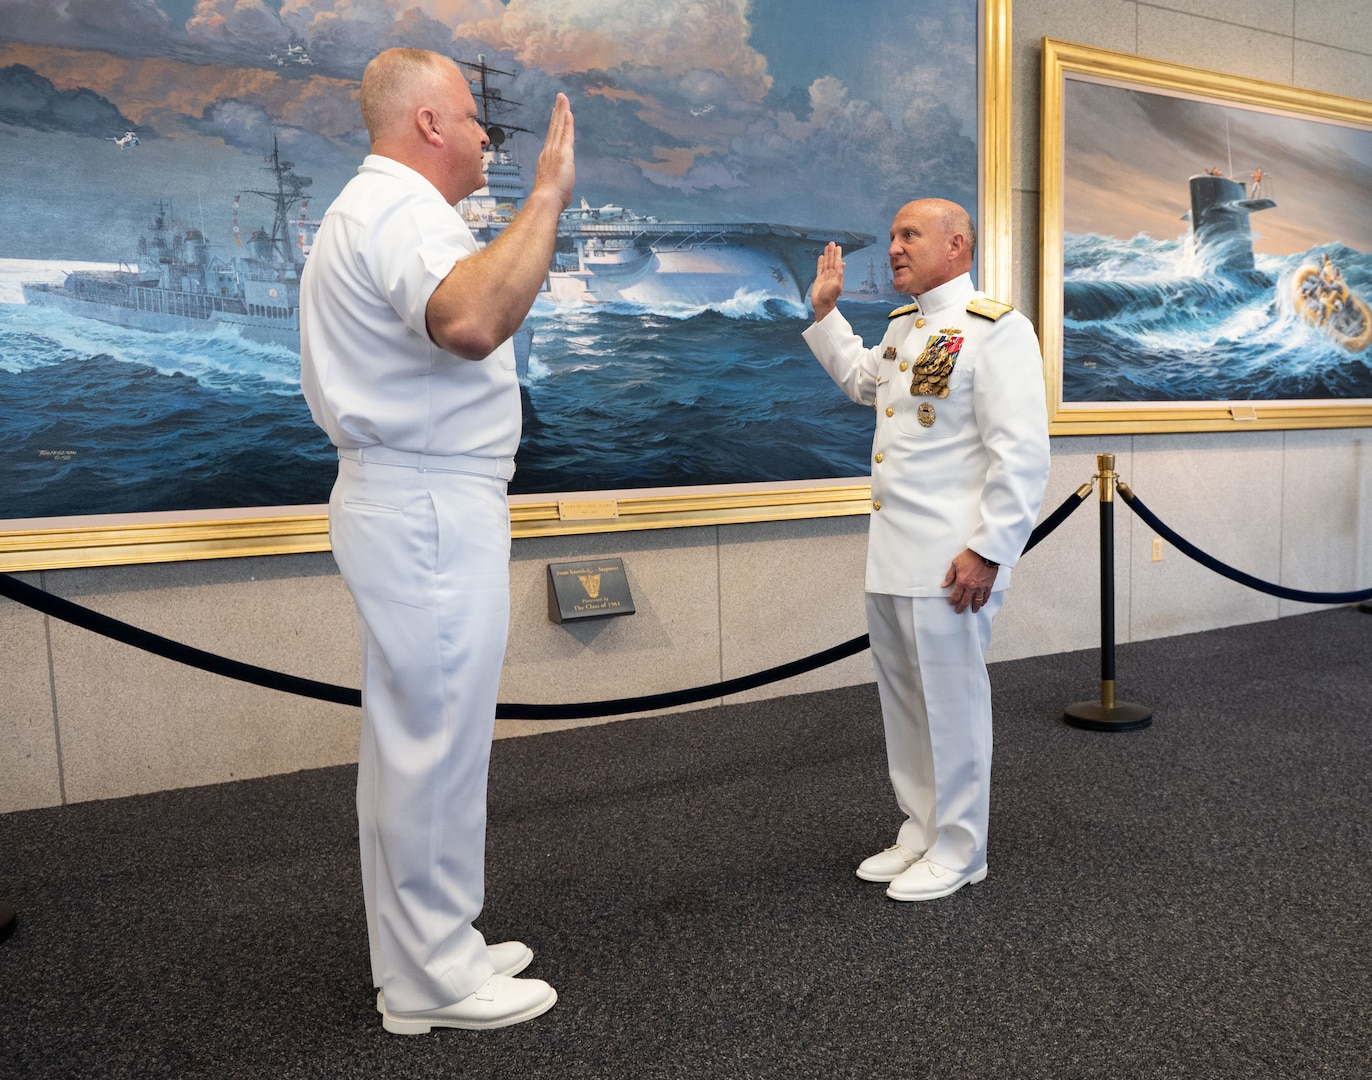 Chief of Naval Operations Adm. Mike Gilday, right, delivers the oath of enlistment to Master Chief Petty Officer of the Navy (MCPON) James Honea before the MCPON Change of Office ceremony held at Mahan Hall, United States Naval Academy, Sept. 8, 2022.